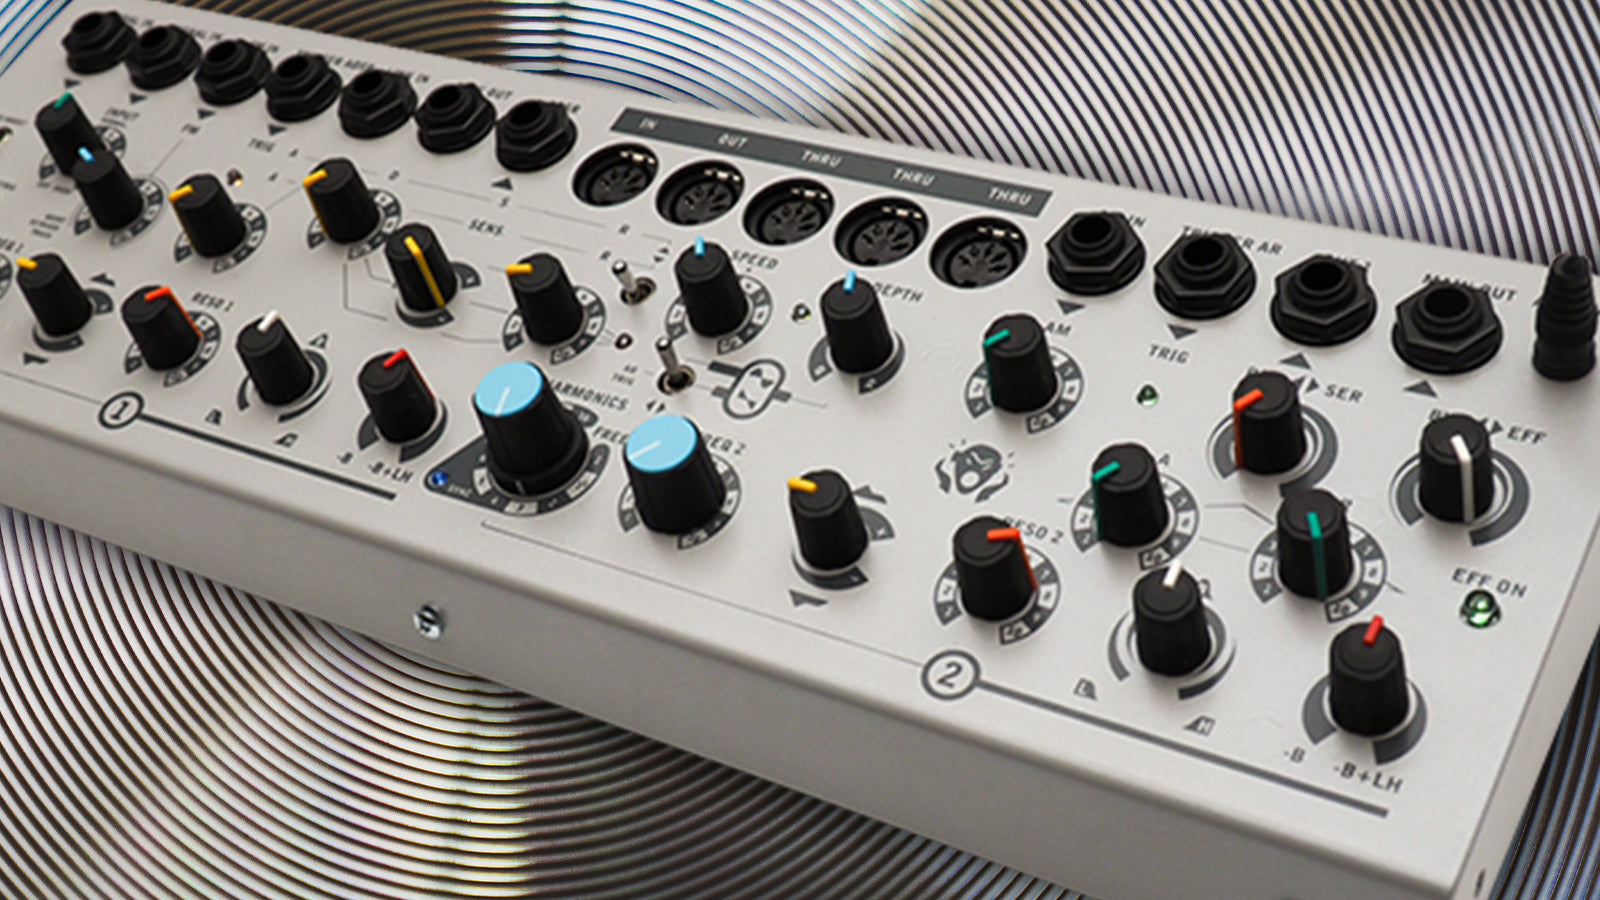 A Sherman modular synth on a spiral metal background